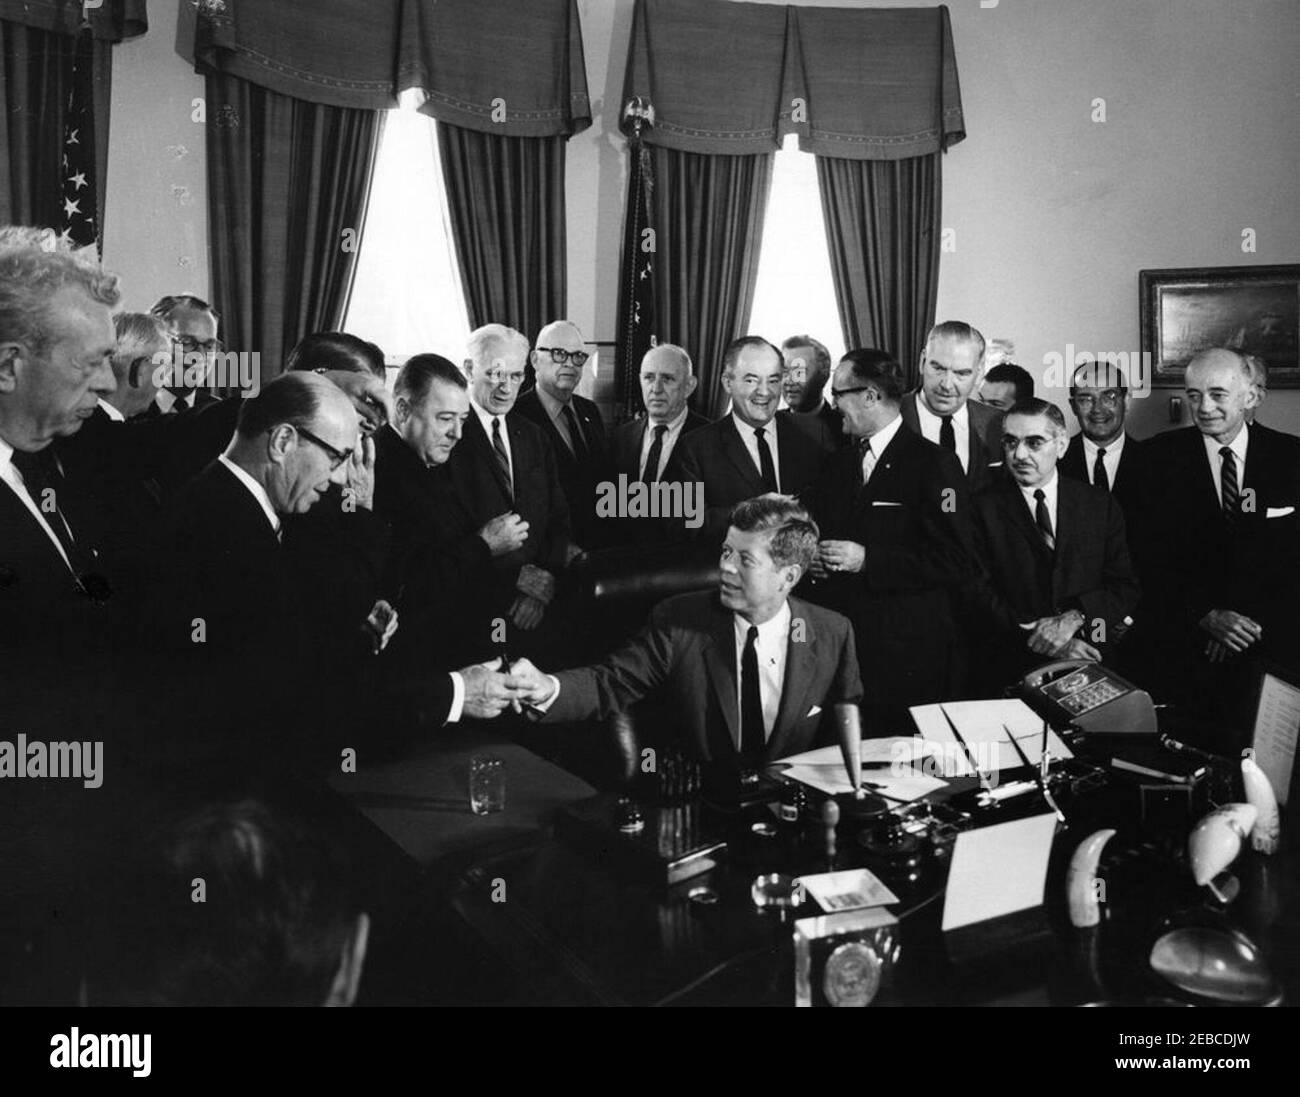 Bill signing, H.R. 11040 Public Law 87-624, Communications Satellite Act of 1962, 9:45AM. President John F. Kennedy hands a pen to Representative Samuel N. Friedel of Maryland during a signing ceremony for HR 11040, the Communications Satellite Act of 1962. (L-R) Senator Everett Dirksen of Illinois; Representative J. Arthur Younger of California (turned away from camera); Representative John B. Bennett of Michigan; Representative Friedel (front, glasses); Representative Oren Harris of Arkansas (mostly hidden behind hand); Senator Warren G. Magnuson of Washington; Speaker of the House of Repres Stock Photo